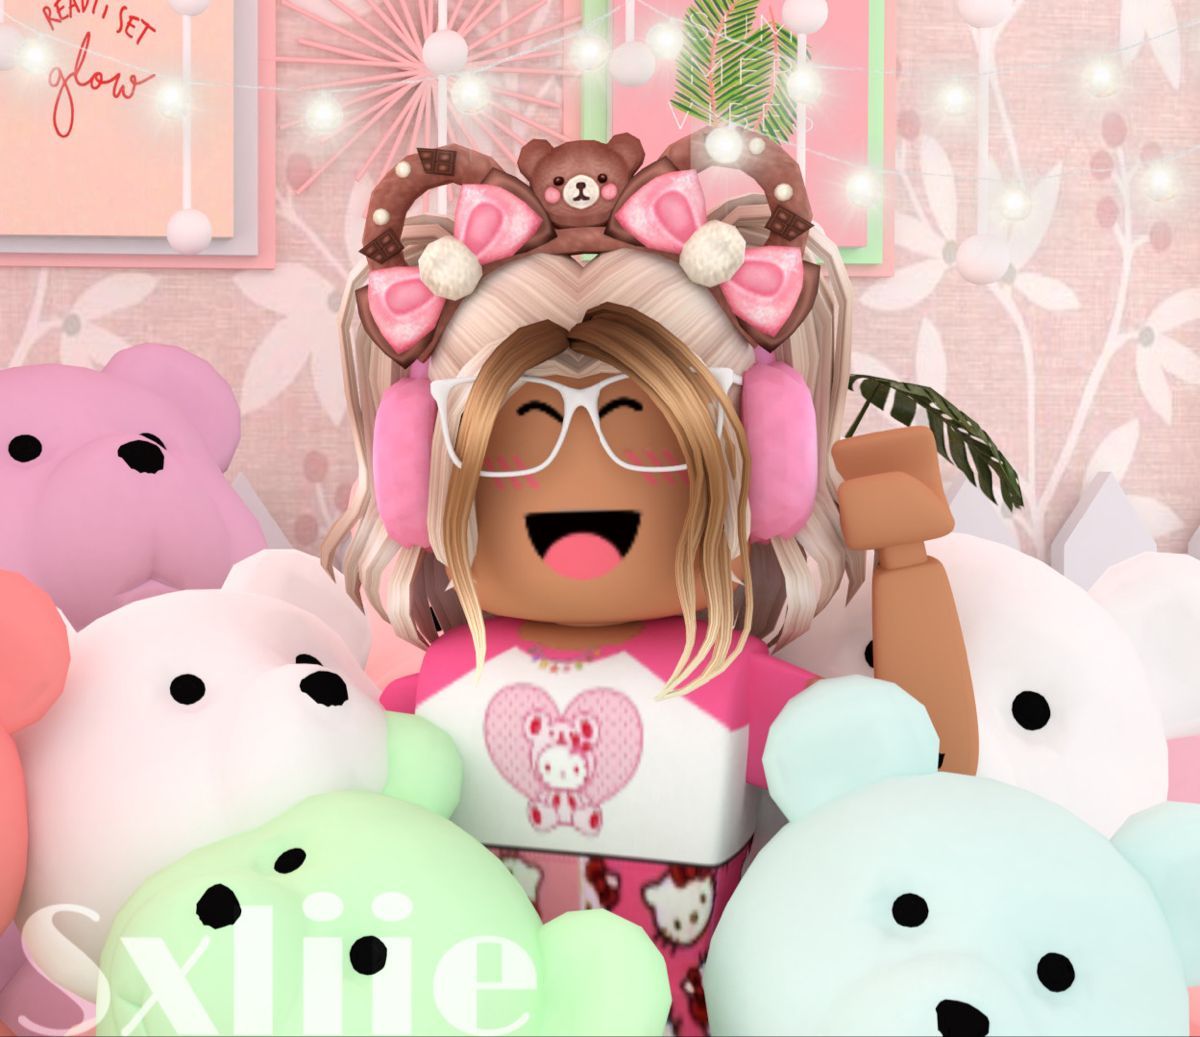 Cute Roblox Avatars Wallpapers Wallpapers